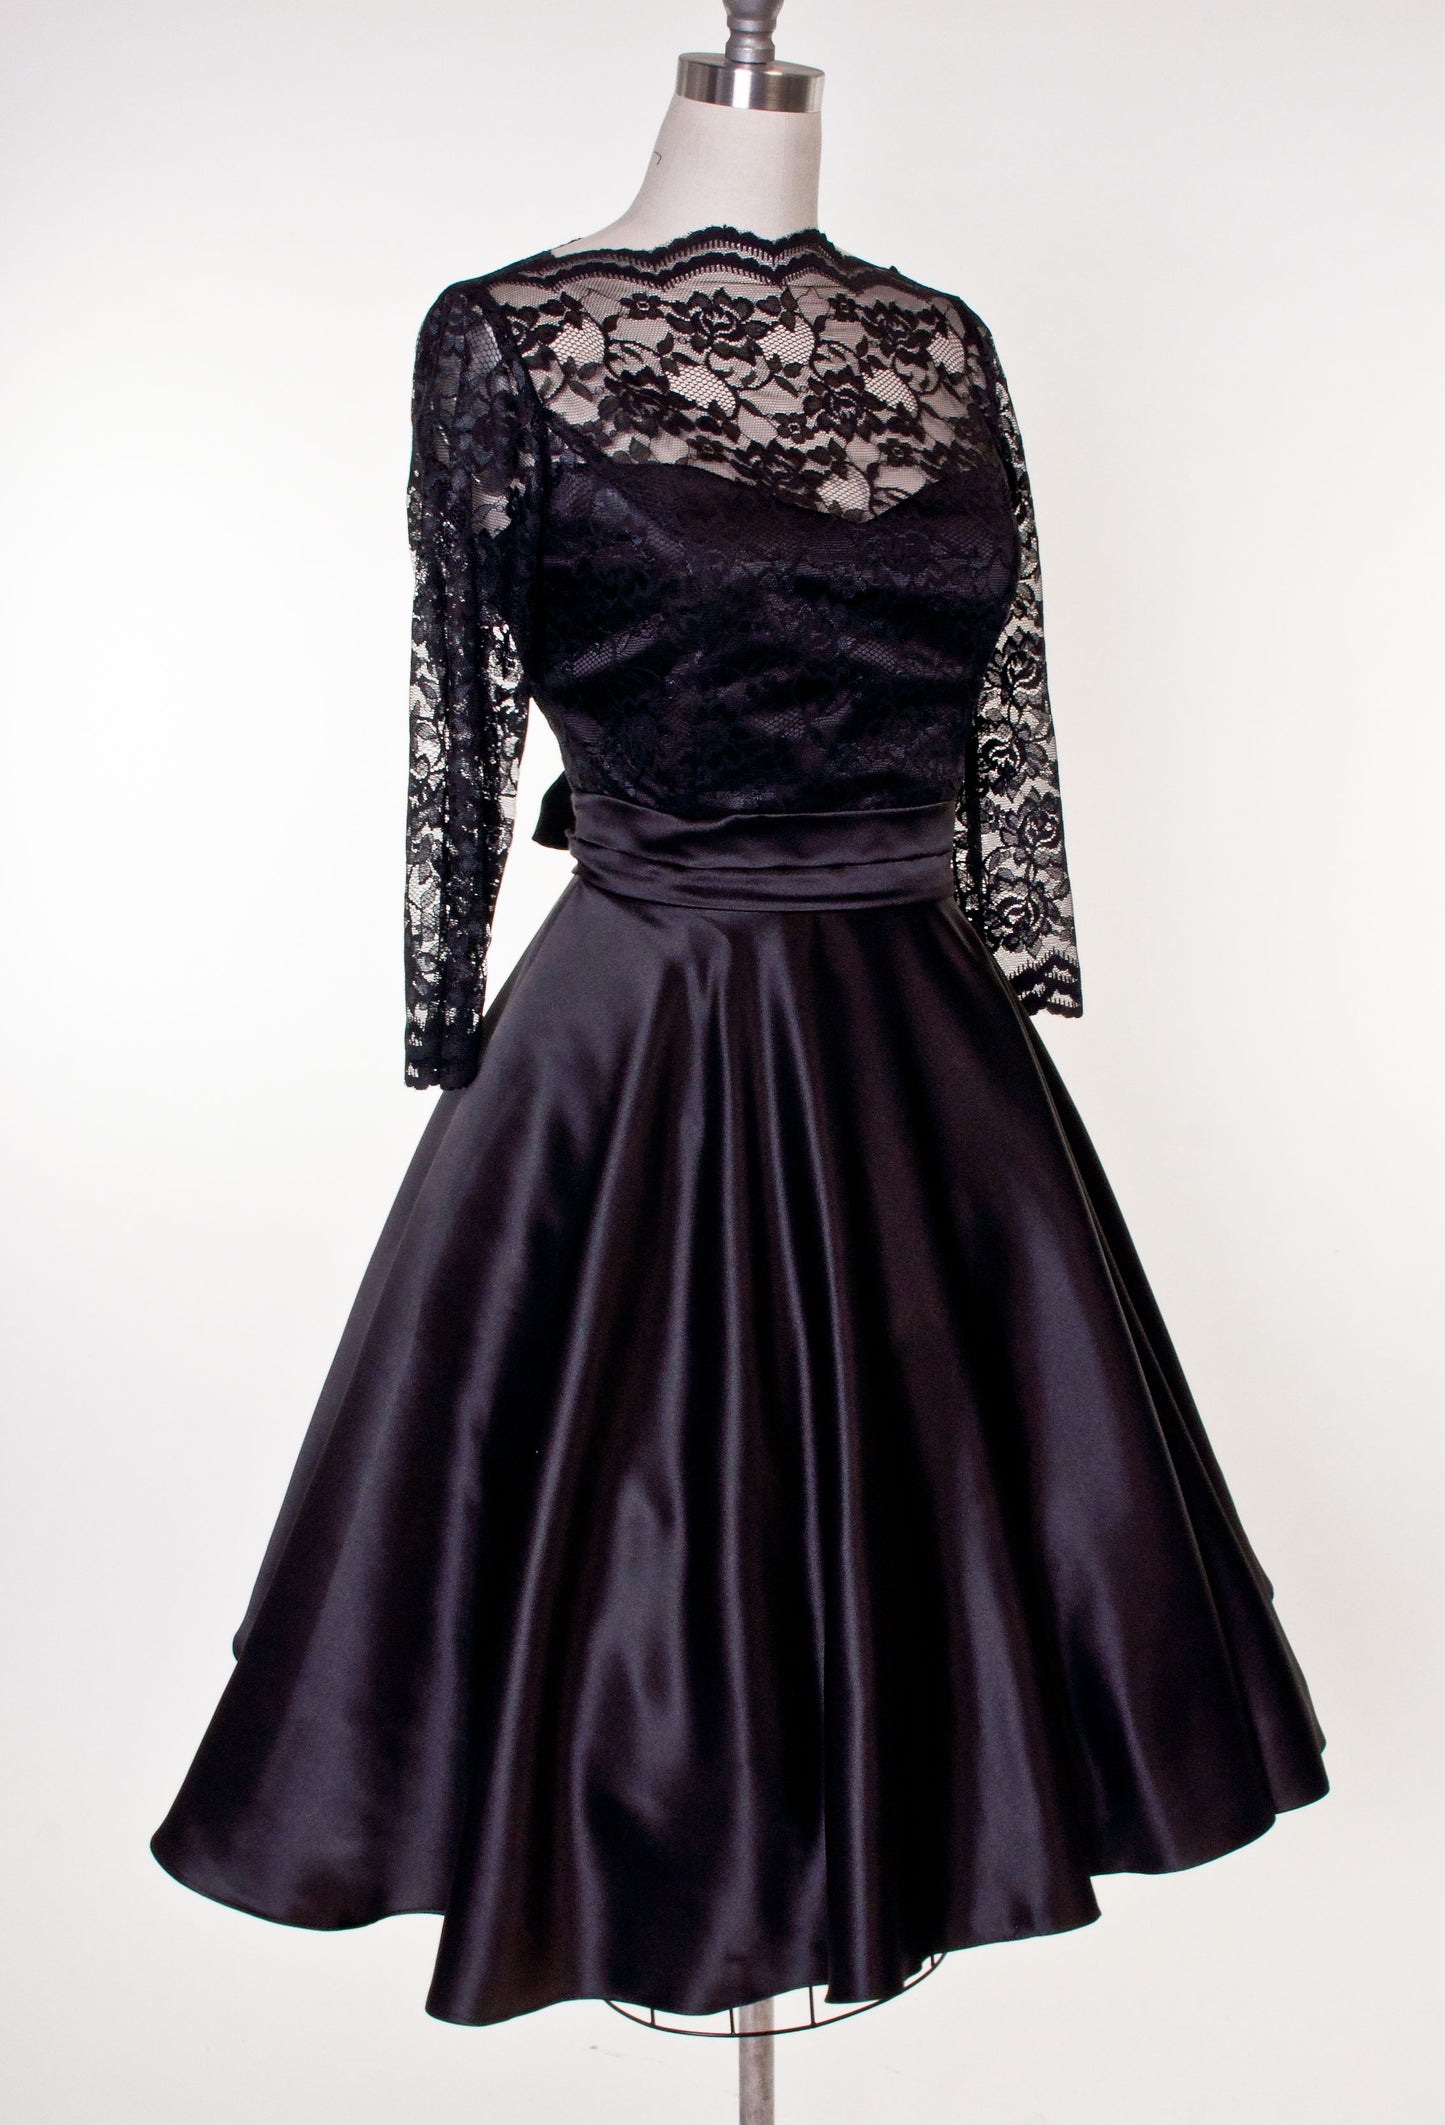 Collette Dress - Black Satin and Lace